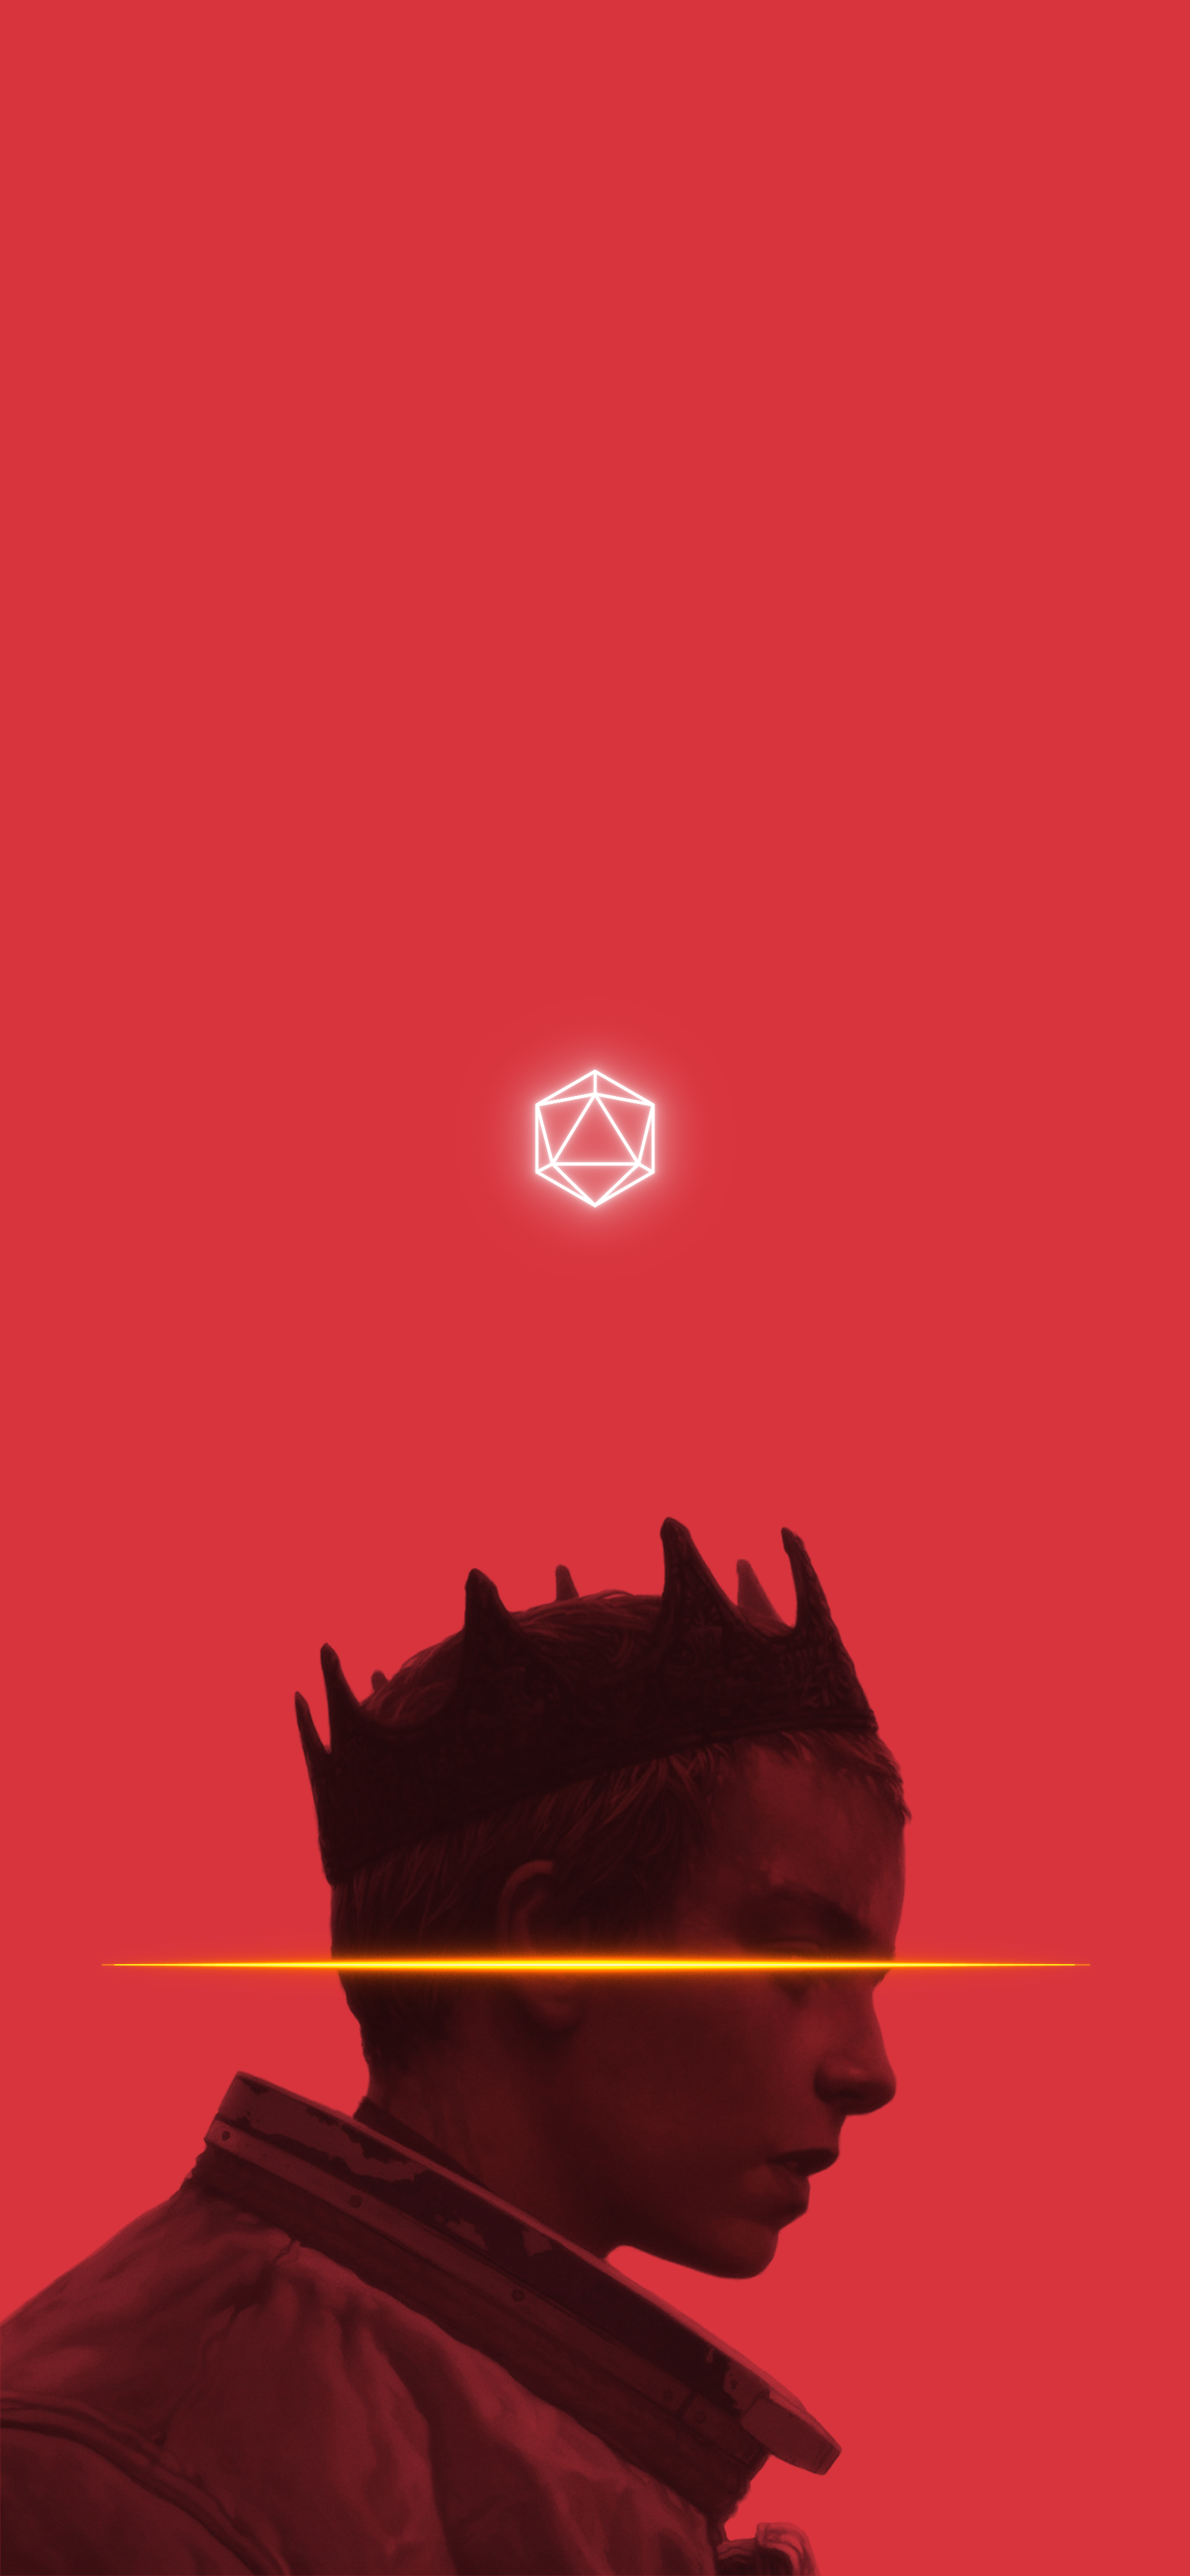 I Made A Simplistic Phone Wallpaper Based On The Loyal Cover Art